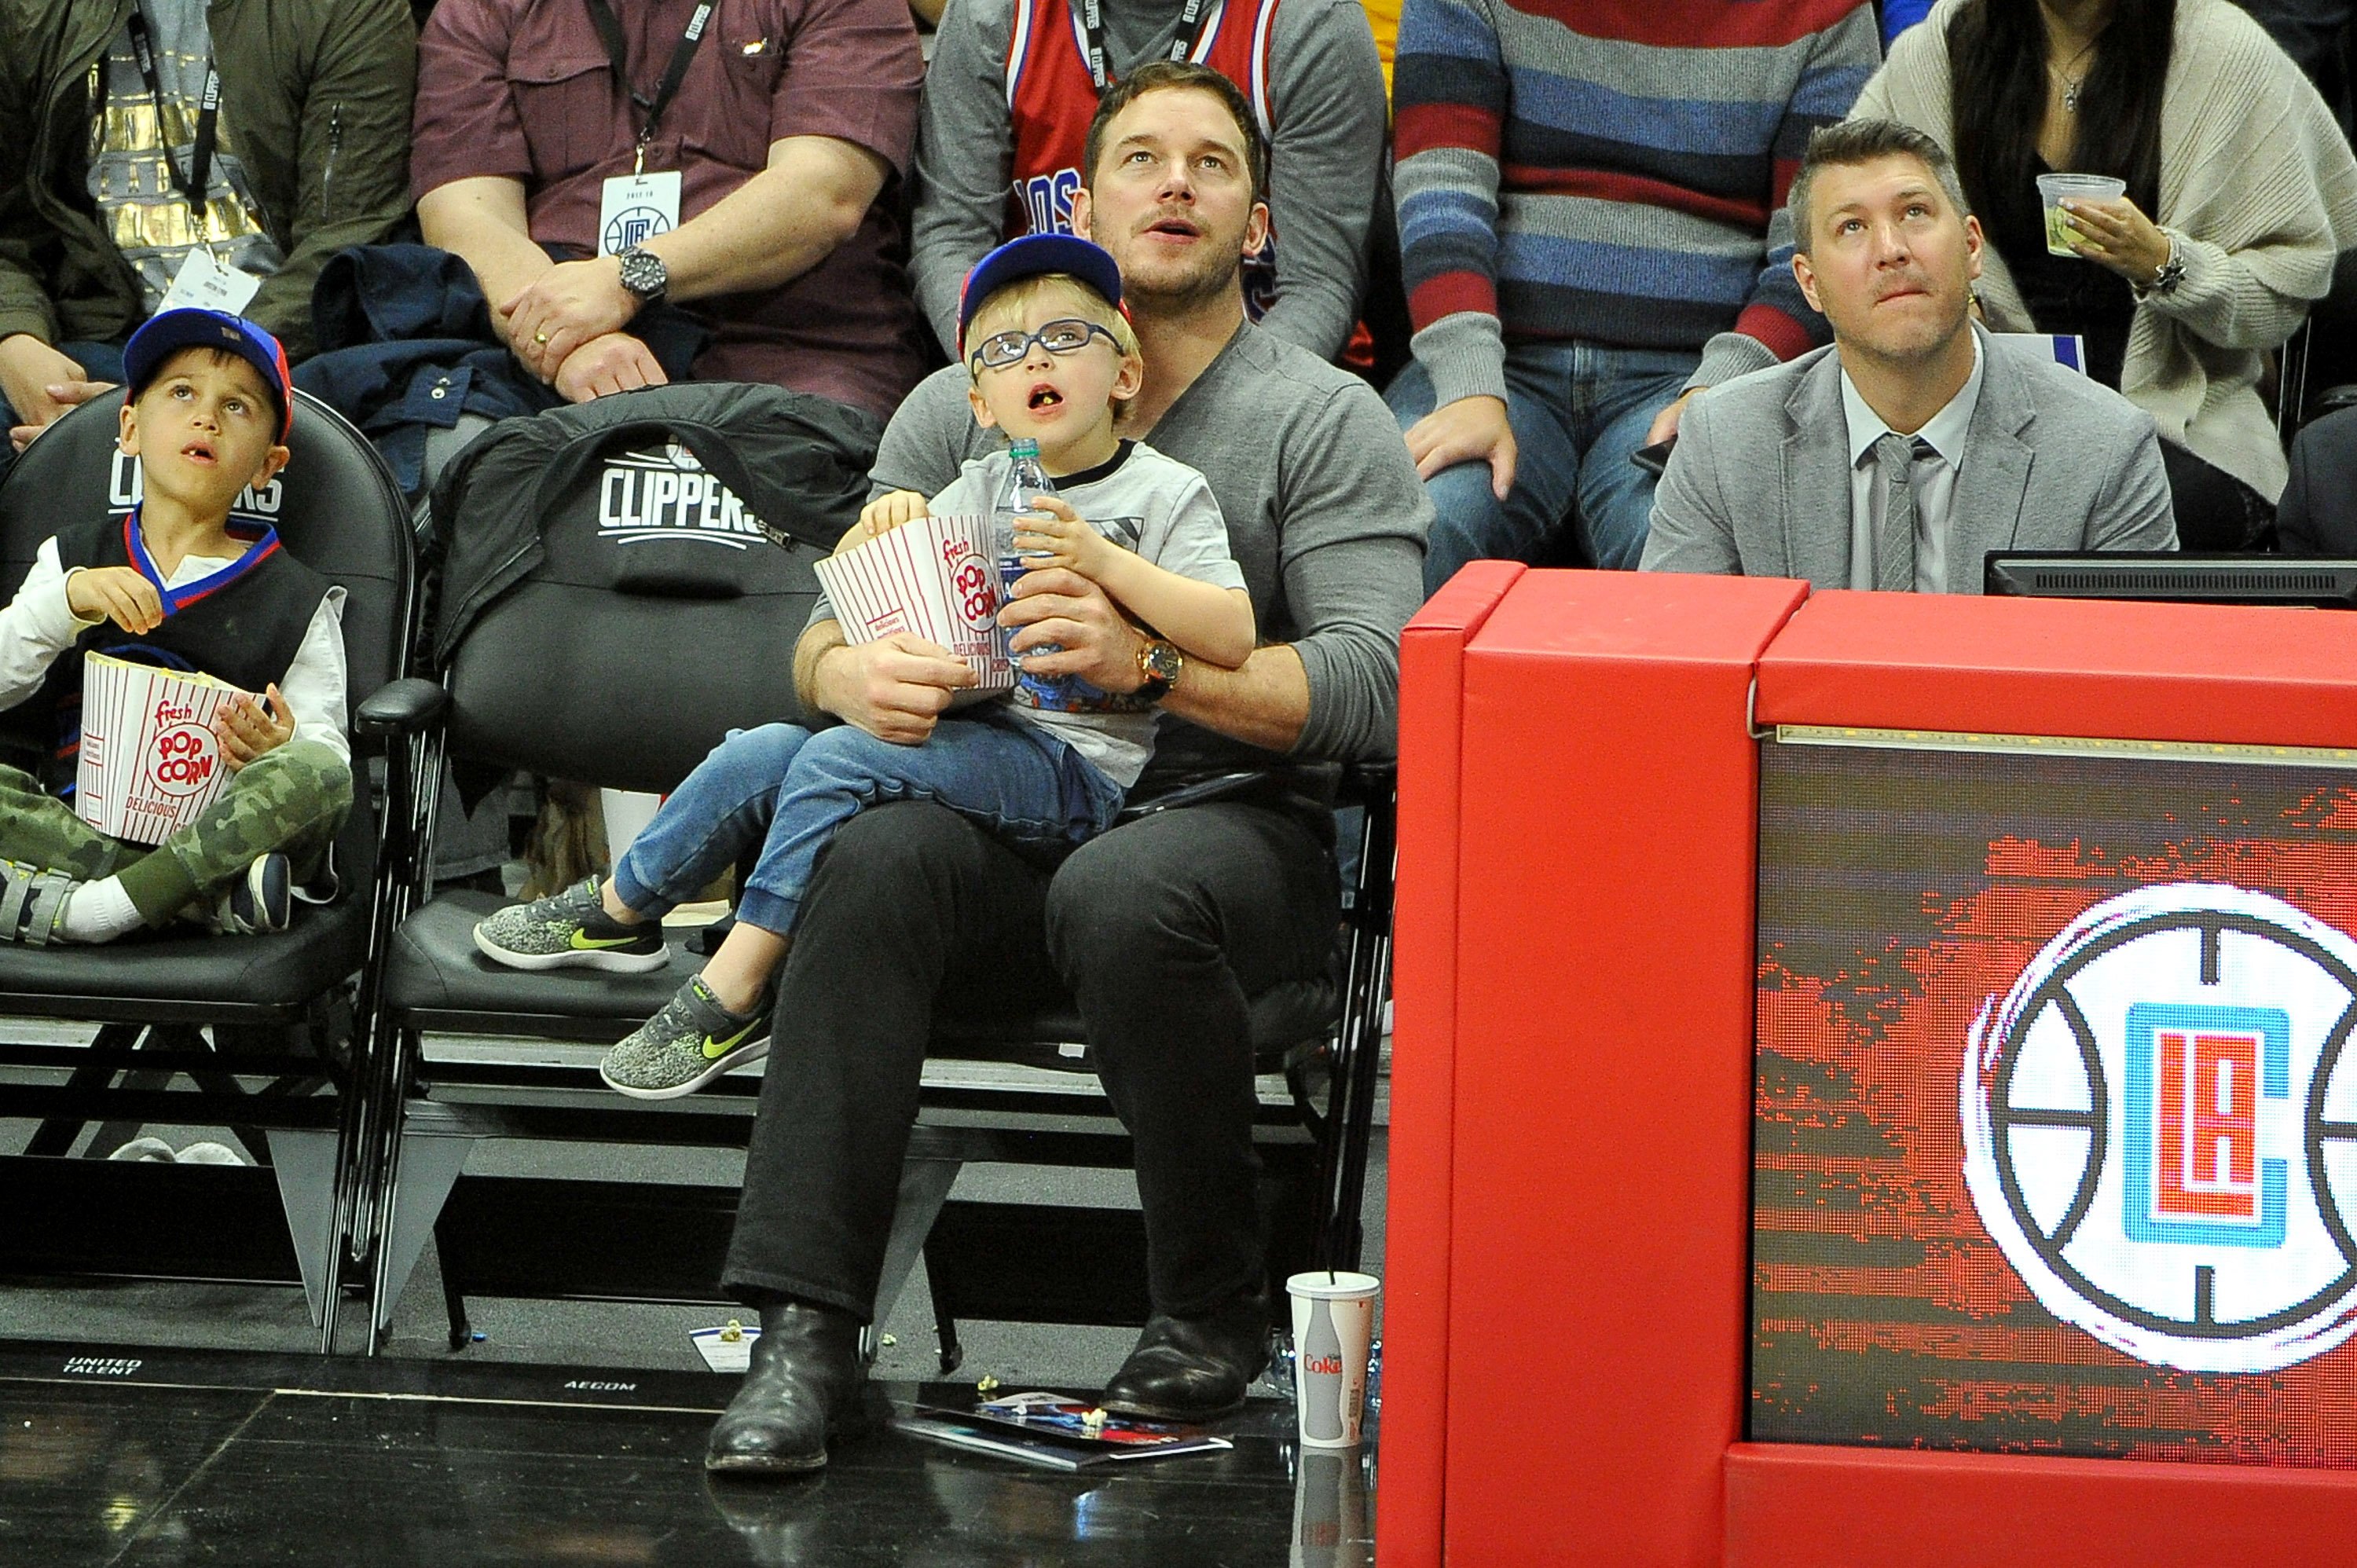  Actor Chris Pratt and son Jack Pratt attend a basketball game between the Los Angeles Clippers and the Minnesota Timberwolves at Staples Center on December 6, 2017, in Los Angeles, California. | Source: Getty Images